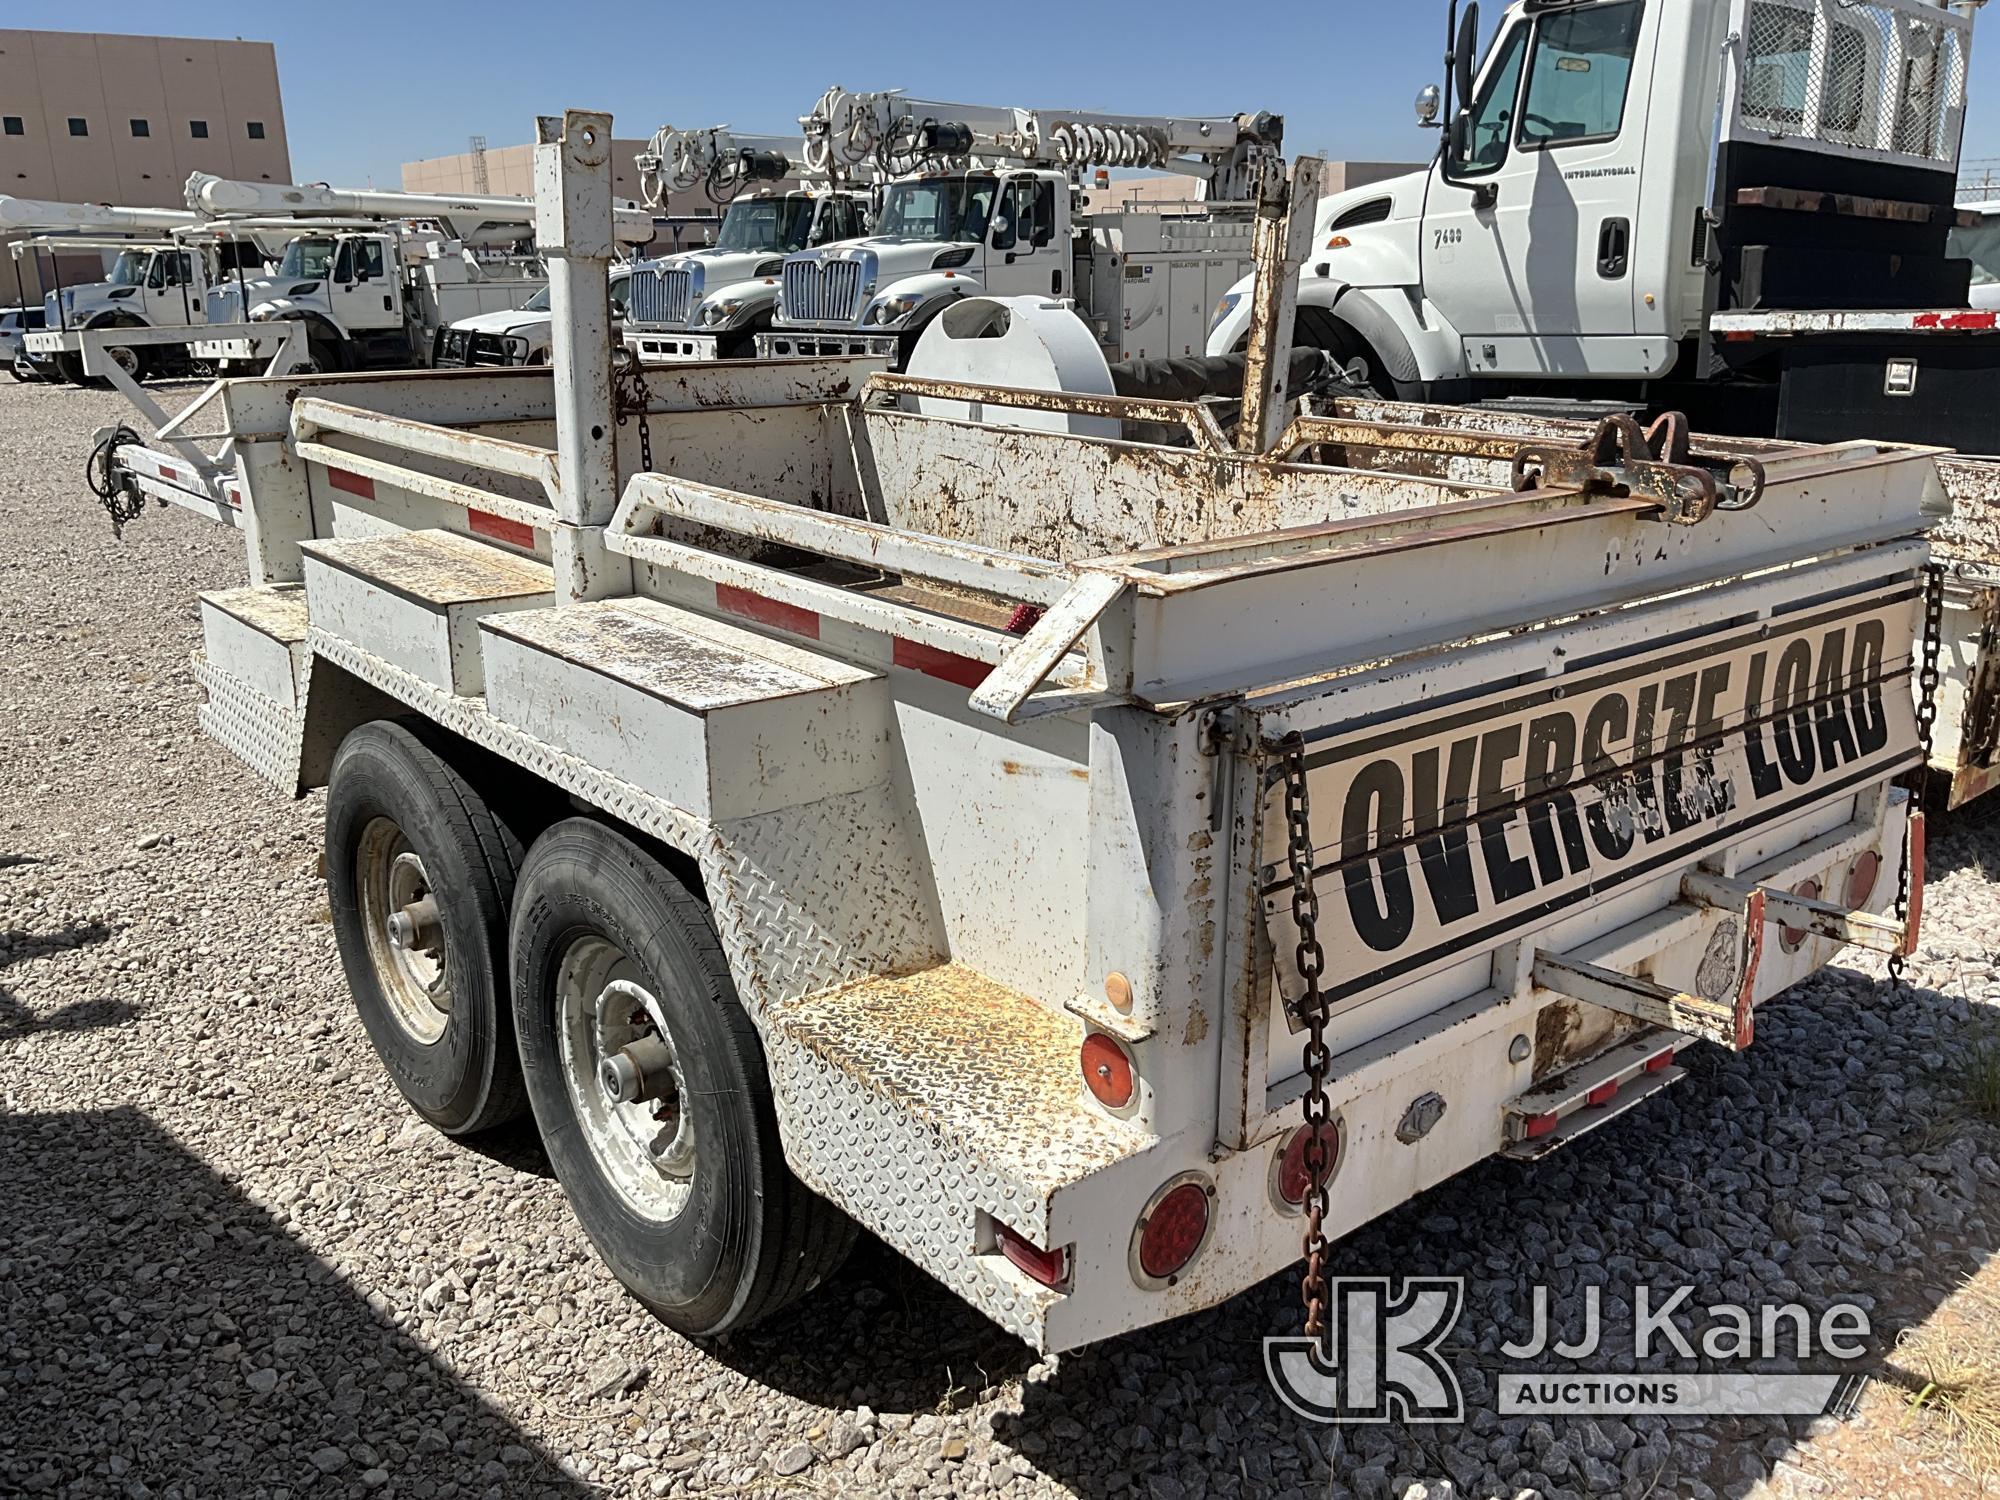 (El Paso, TX) 1992 Clifton T/A Pole/Material Trailer Will Pull, Road Worthy, Paint/Body Damage